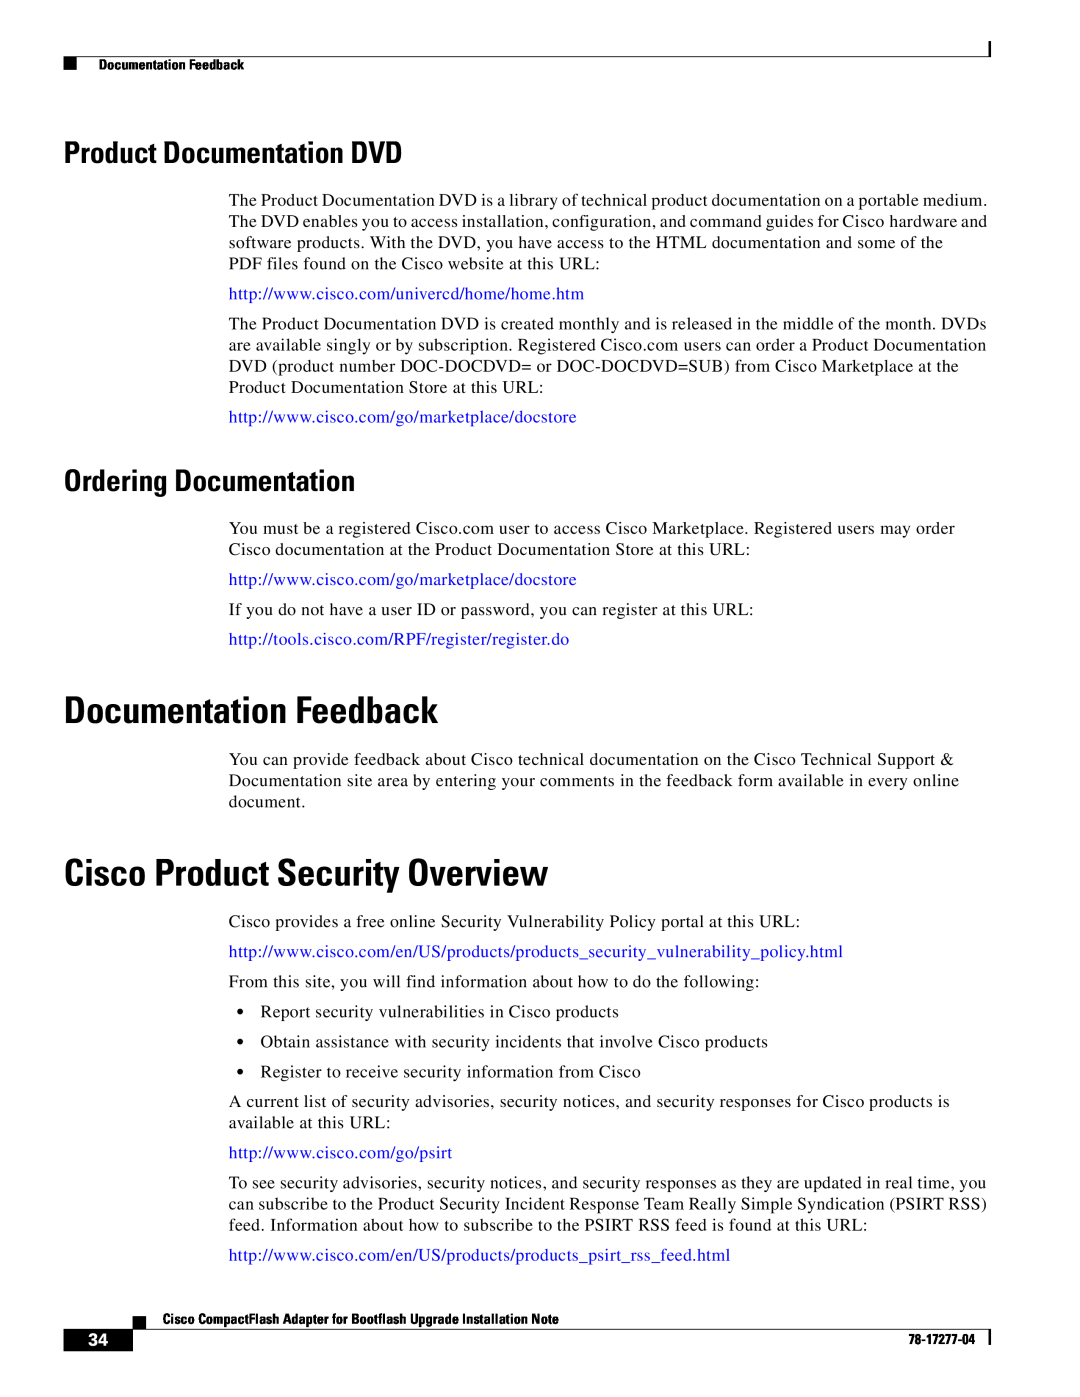 Cisco Systems CompactFlash Adapter Documentation Feedback, Cisco Product Security Overview, Product Documentation DVD 